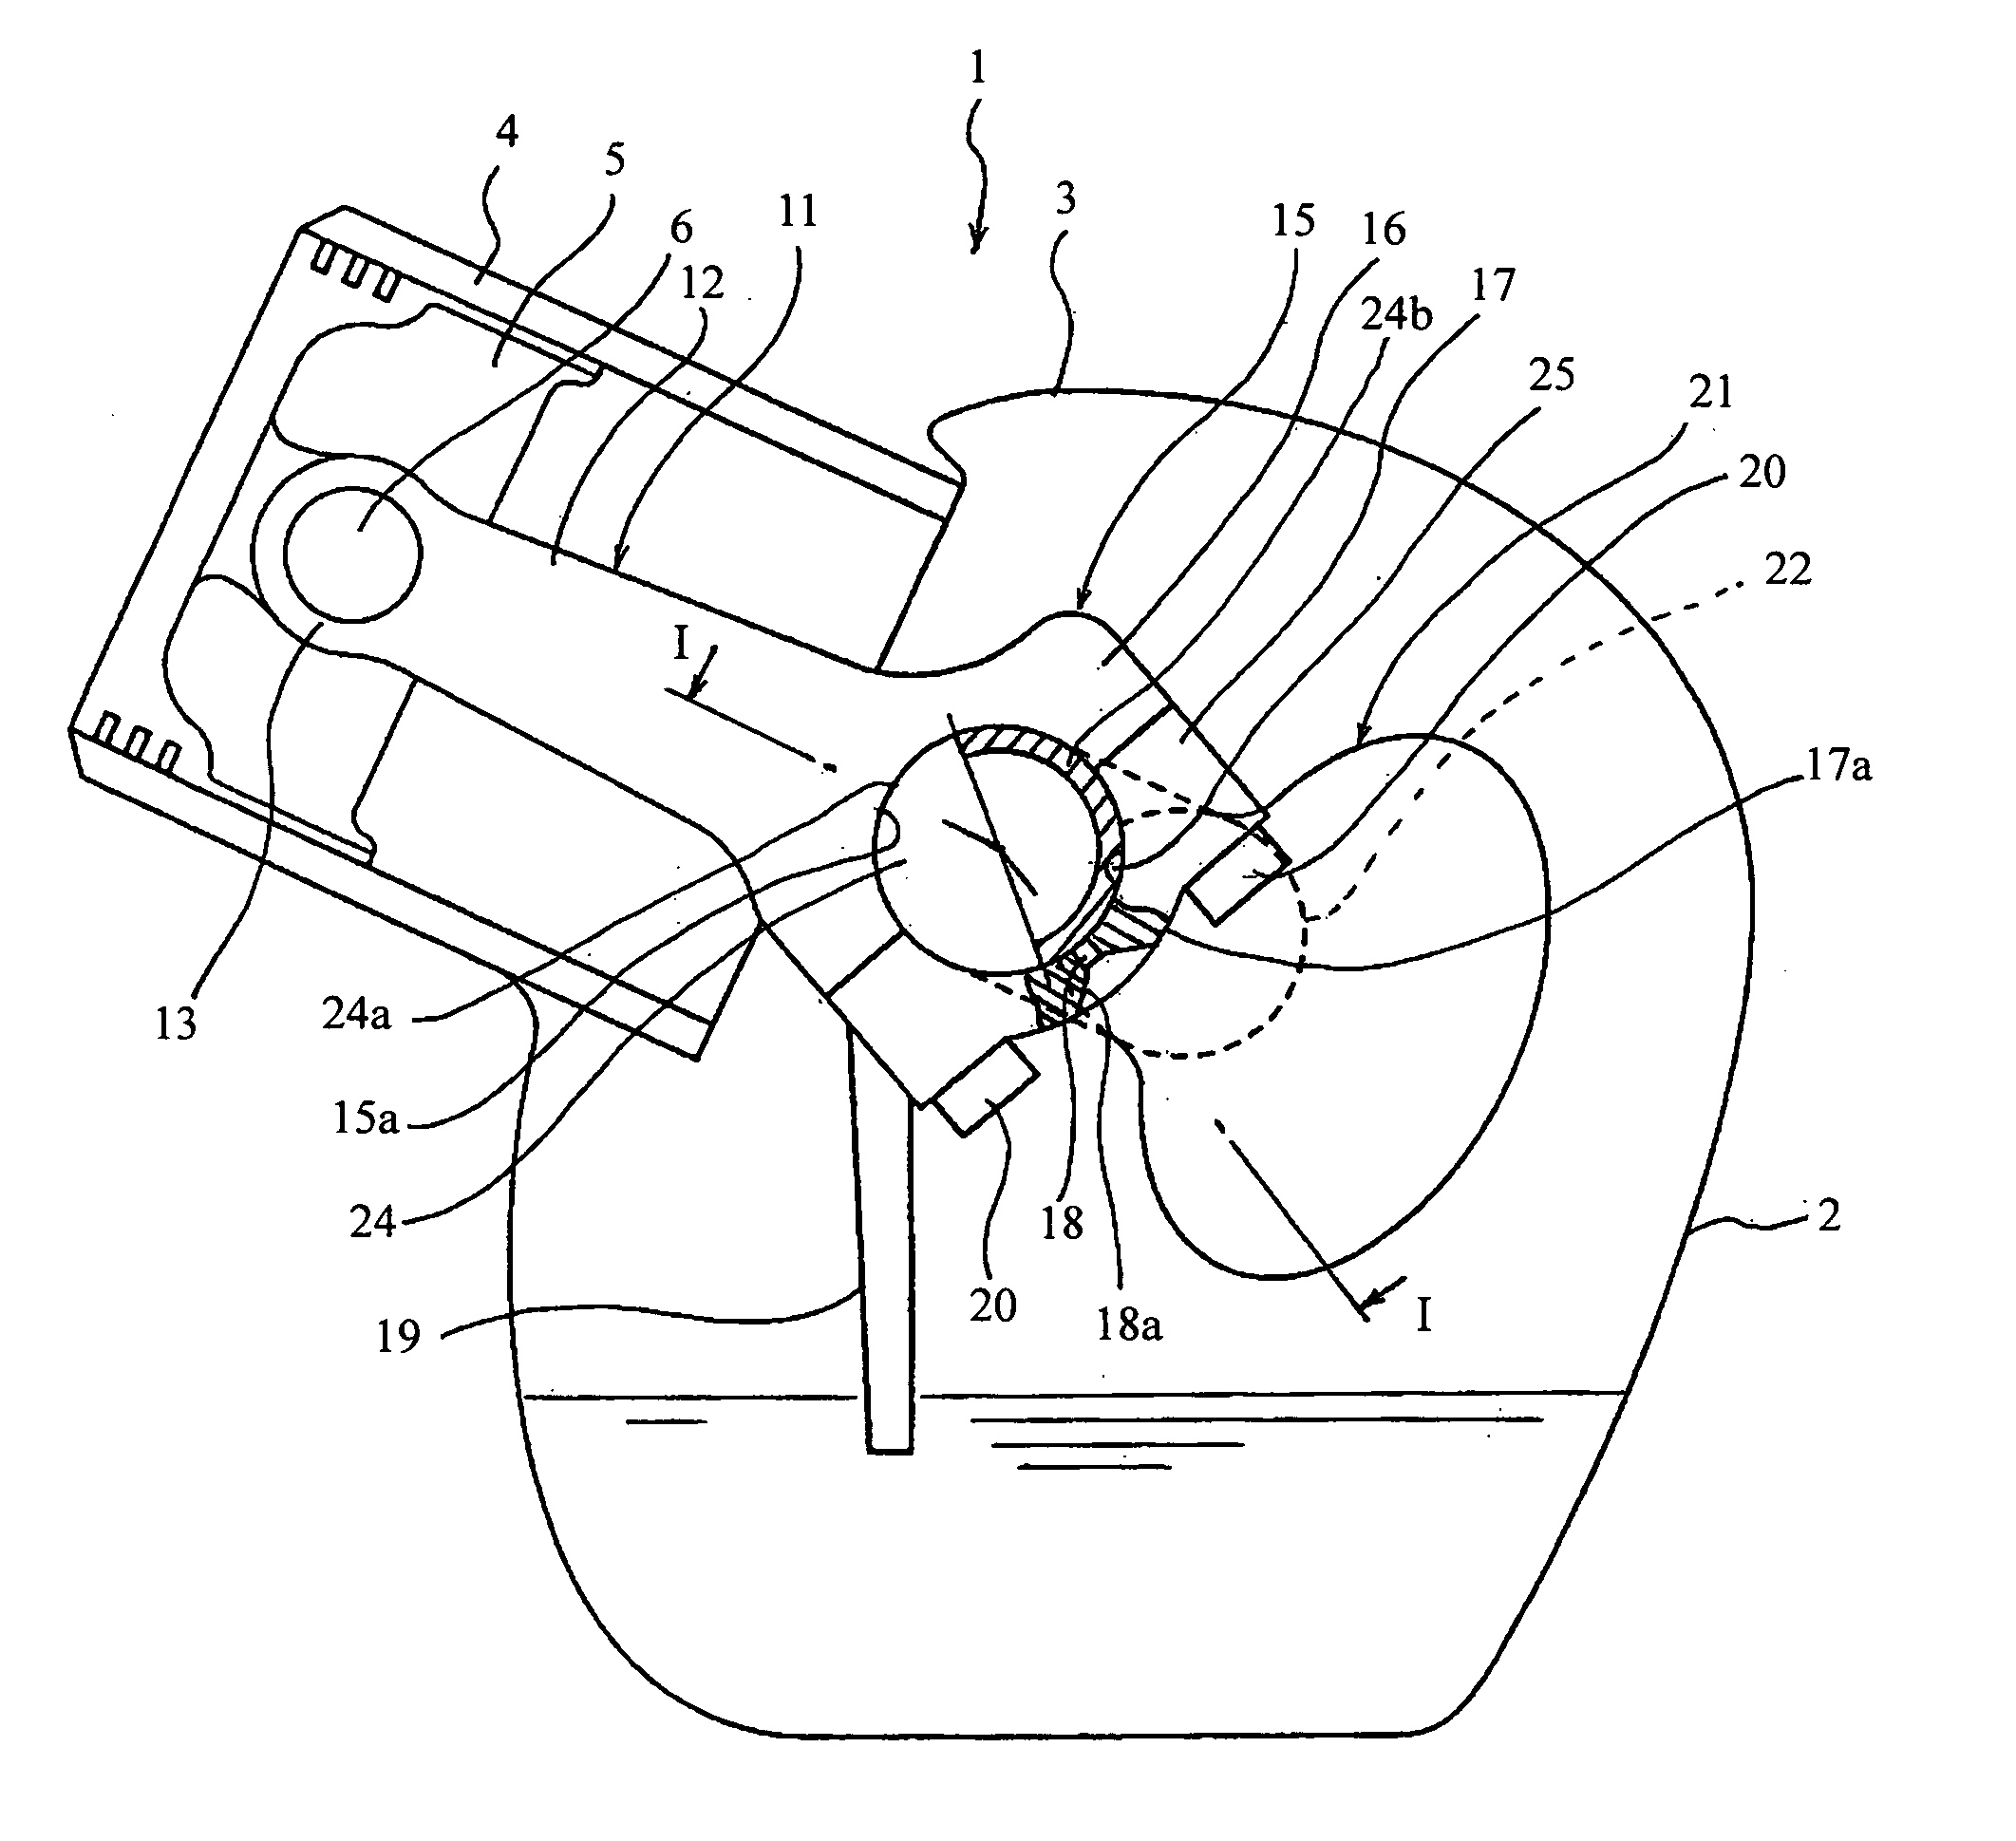 Lubrication structure in engine